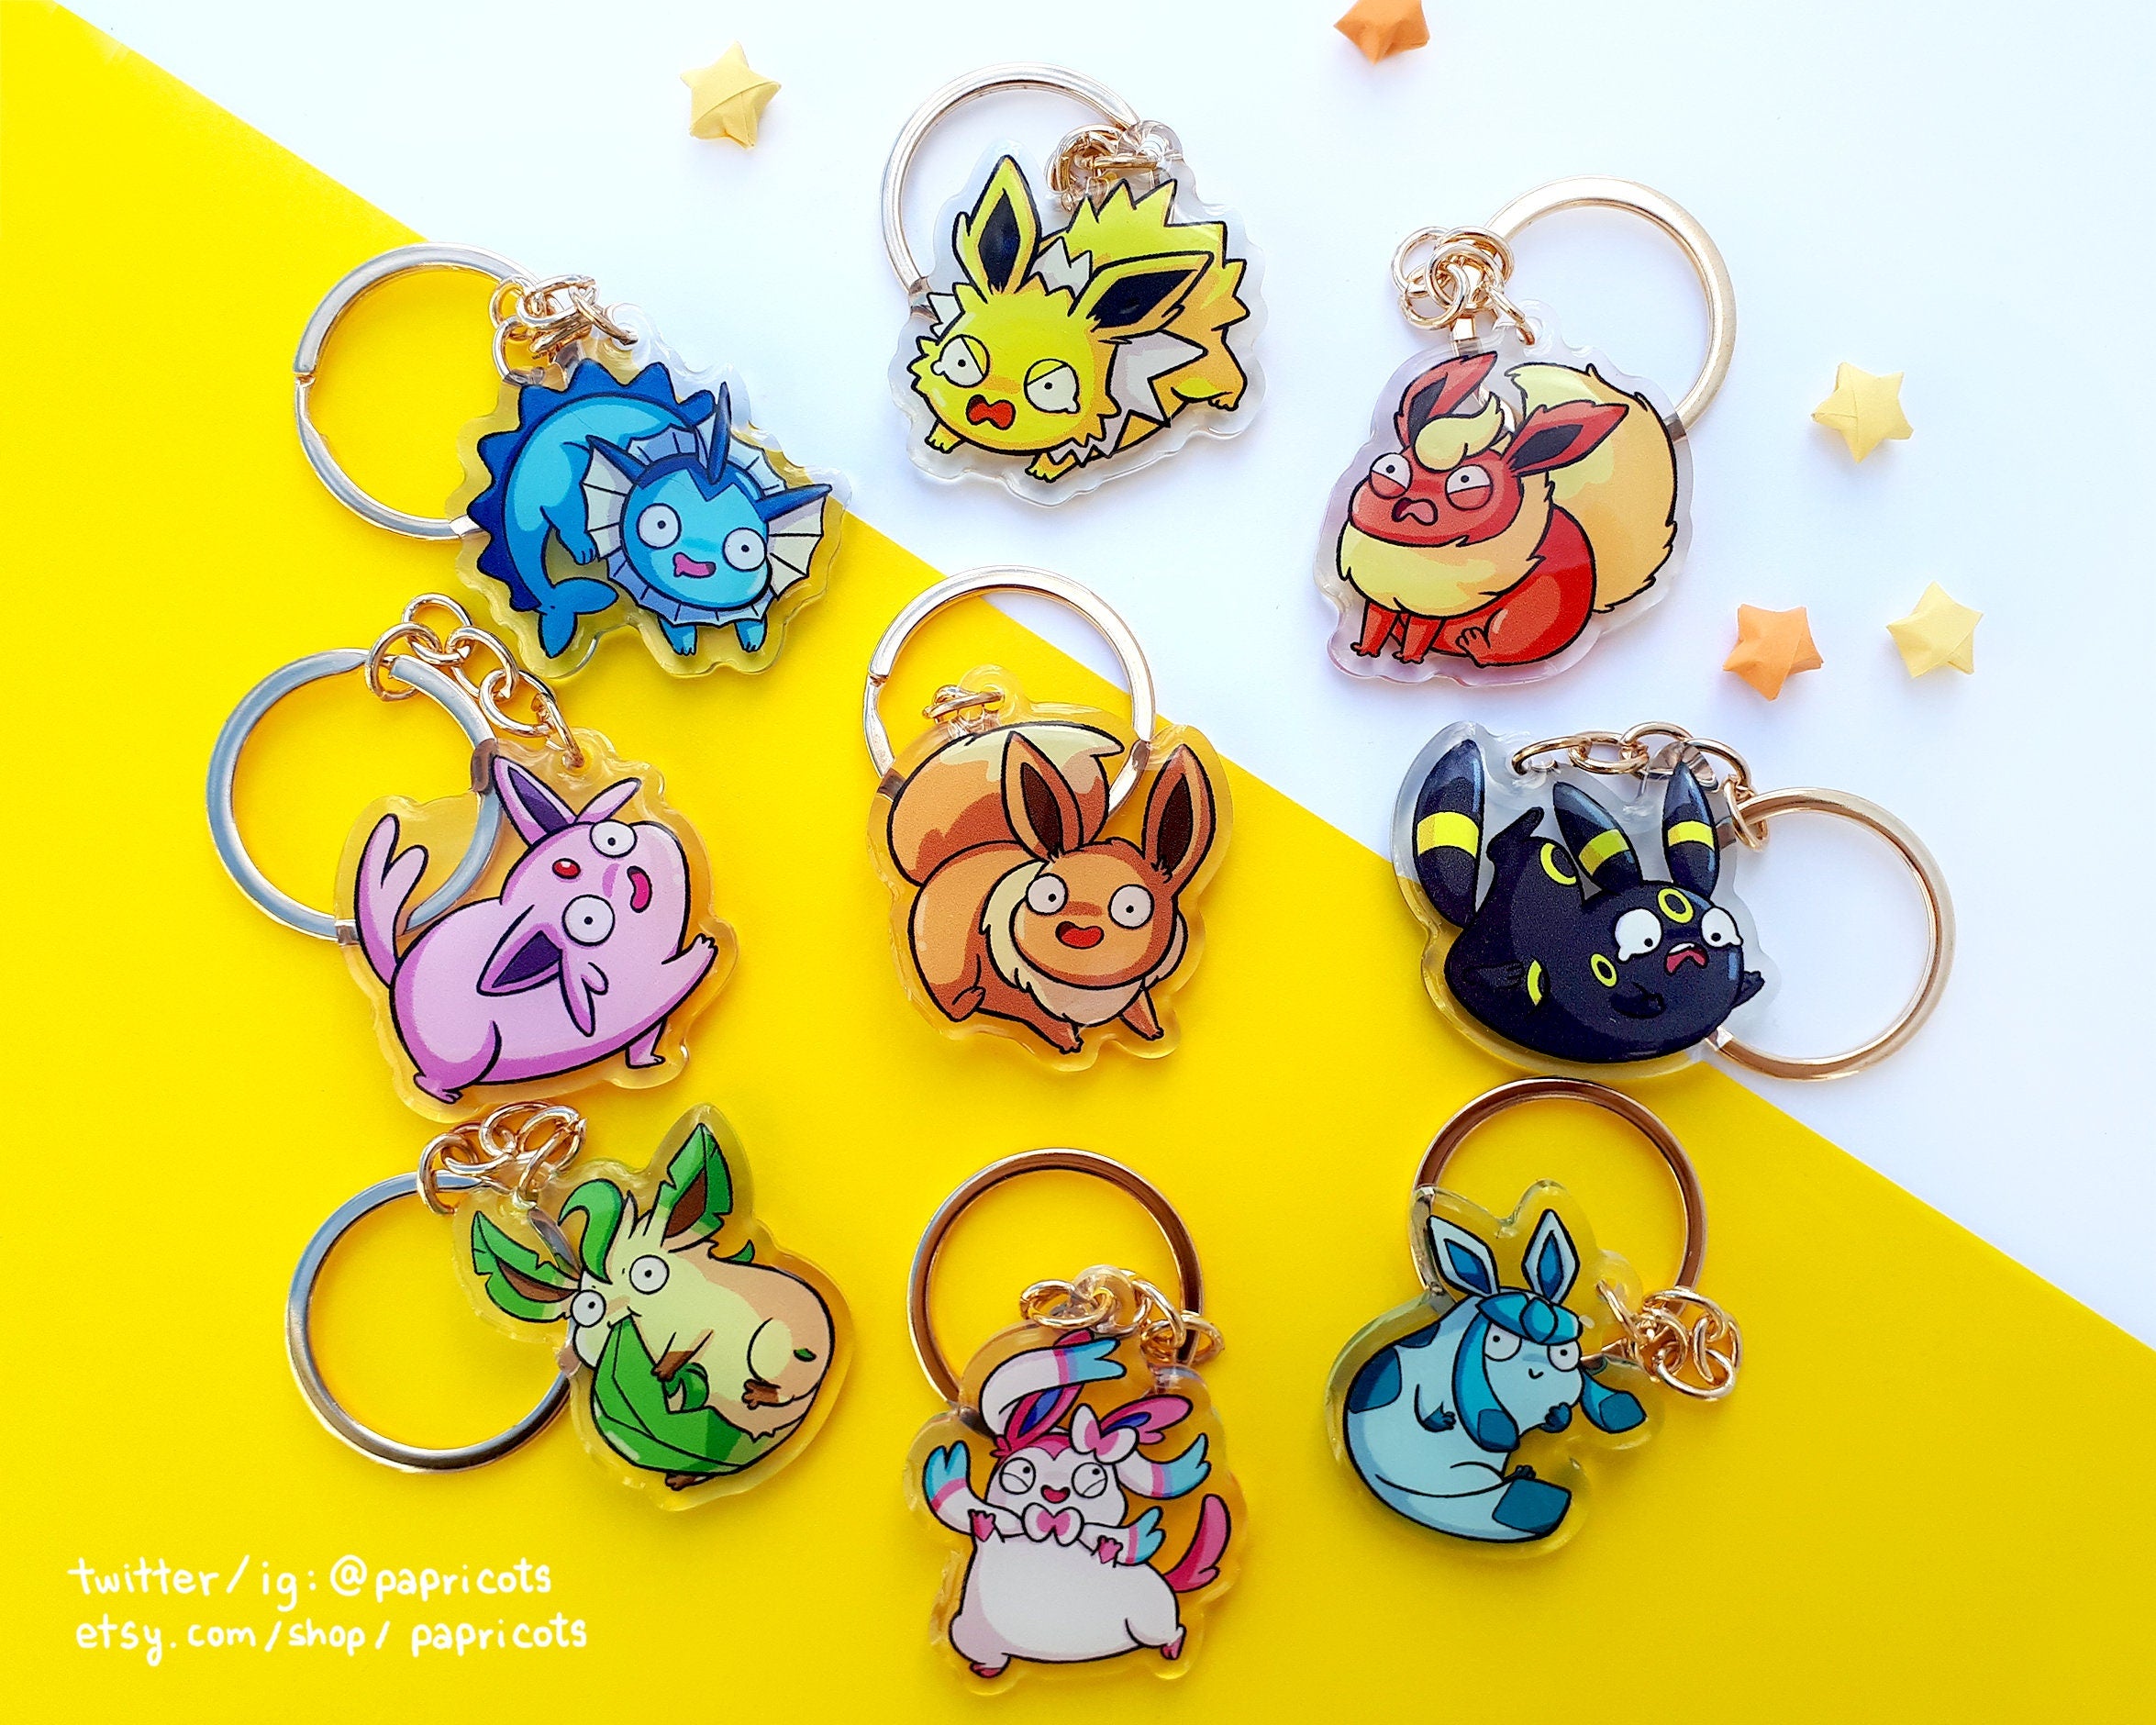 [Papricots] chubby eeveelutions keychains